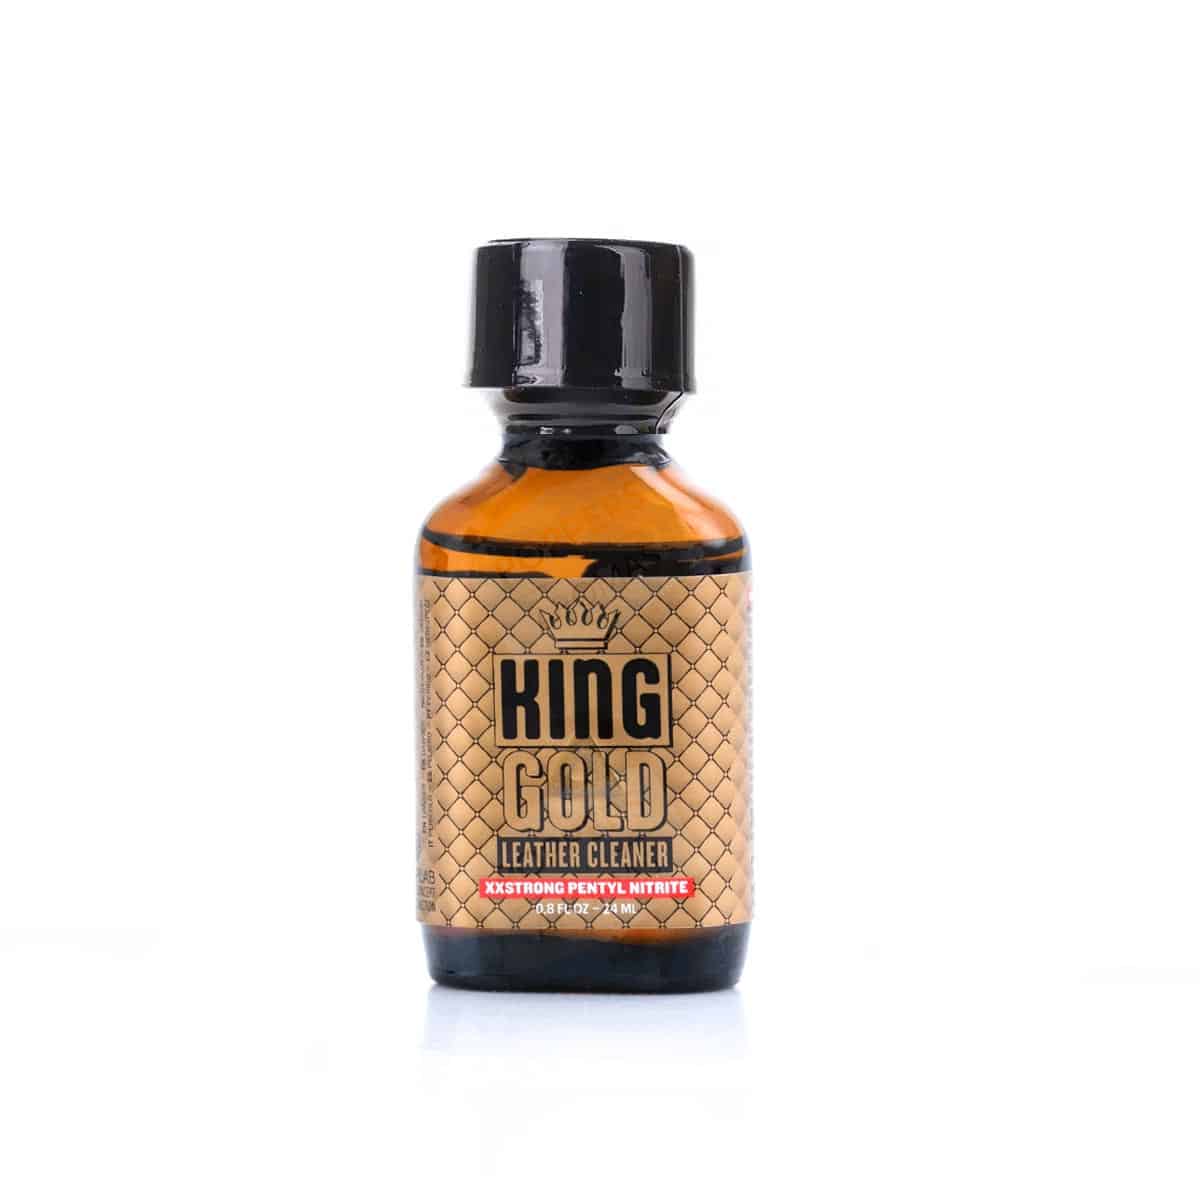 A bottle of King Gold Poppers 24ml leather cleaner, set against a white background.